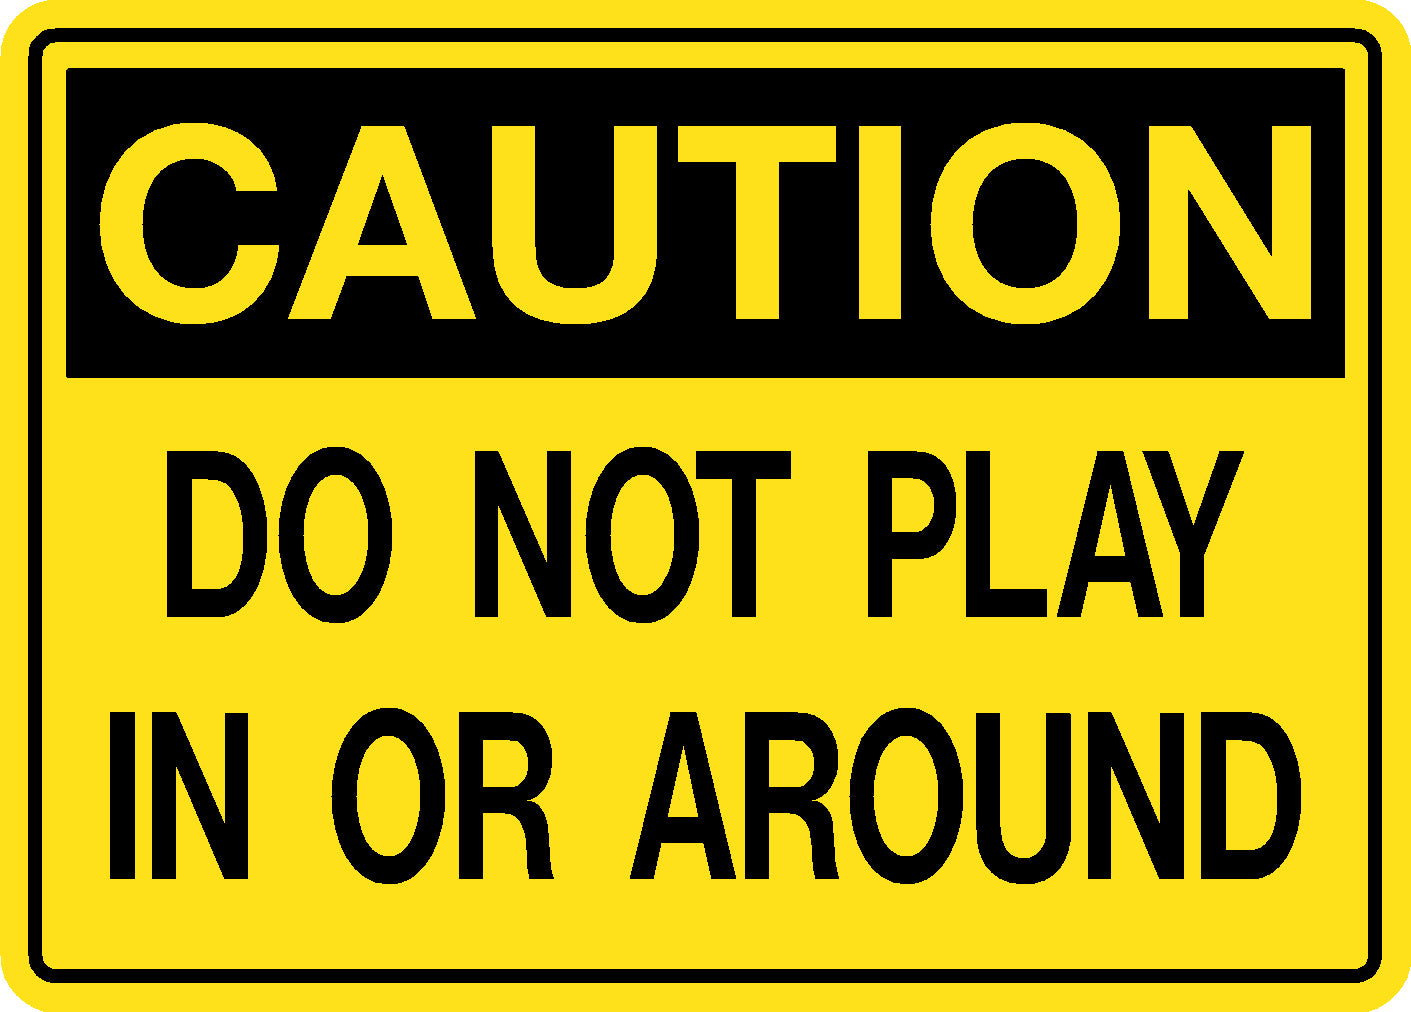 Decal - Caution Do Not Play in or Around